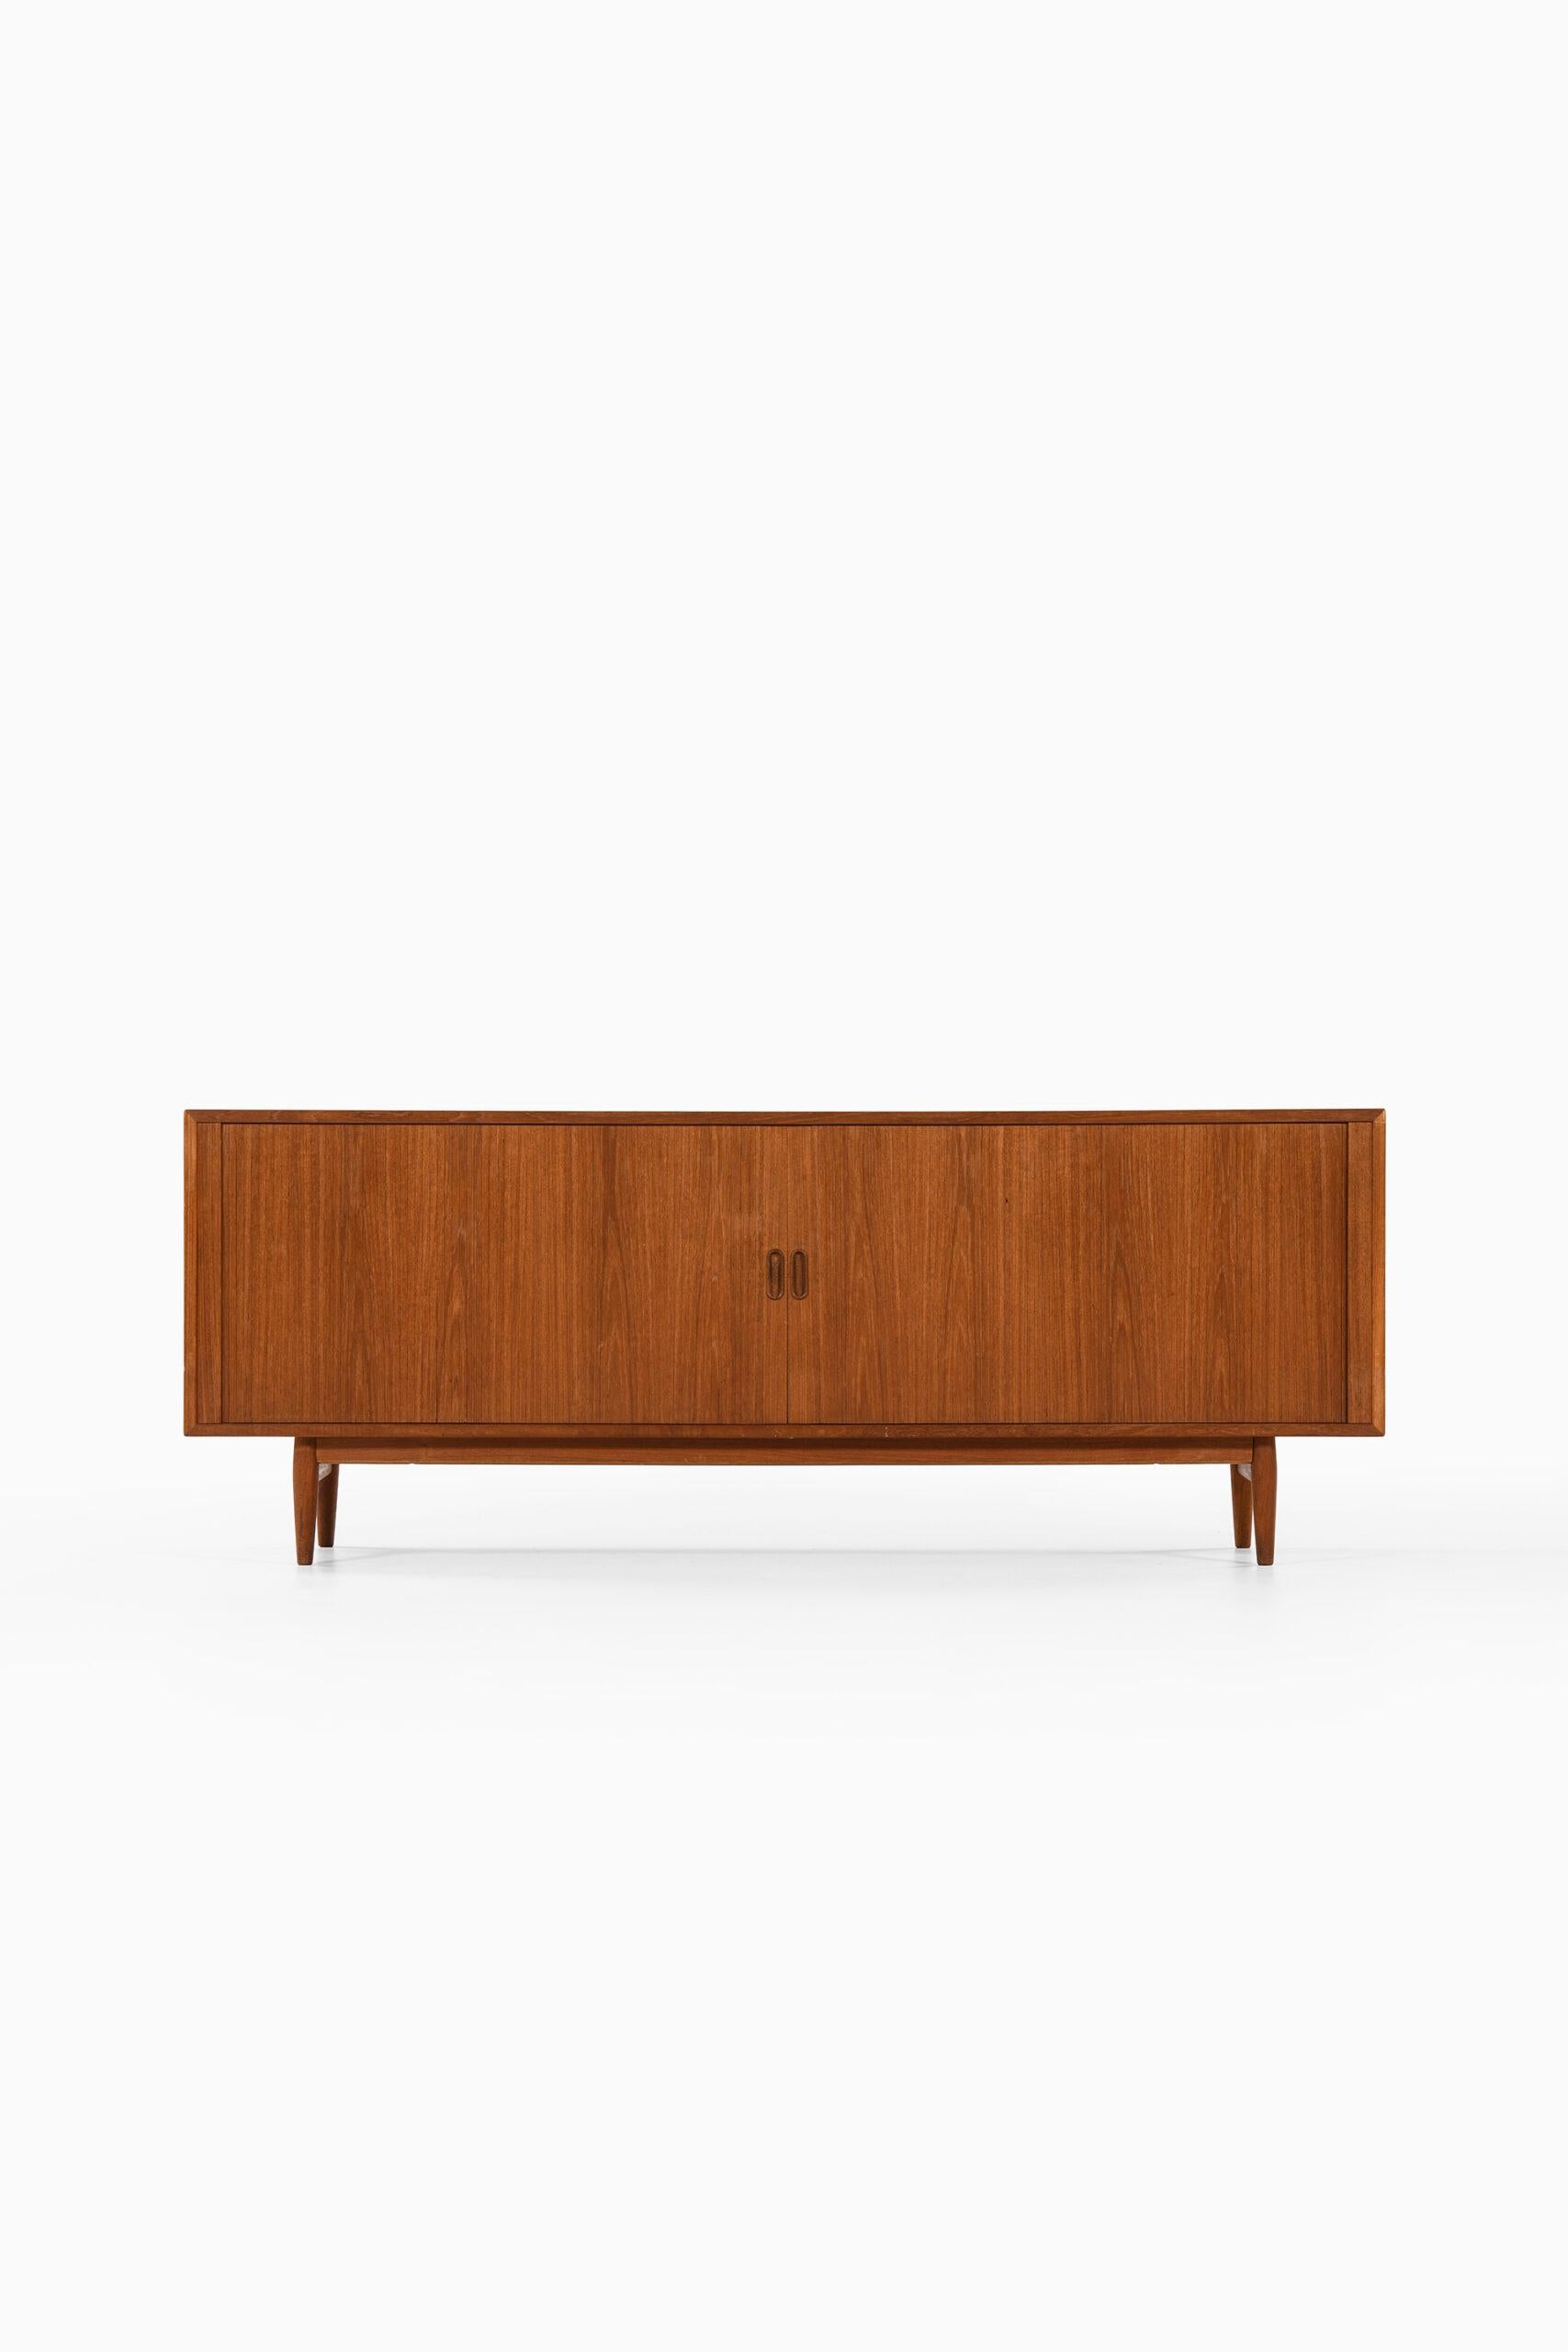 Rare freestanding sideboard with tambour doors designed by Arne Vodder. Produced by Sibast Møbelfabrik in Denmark.